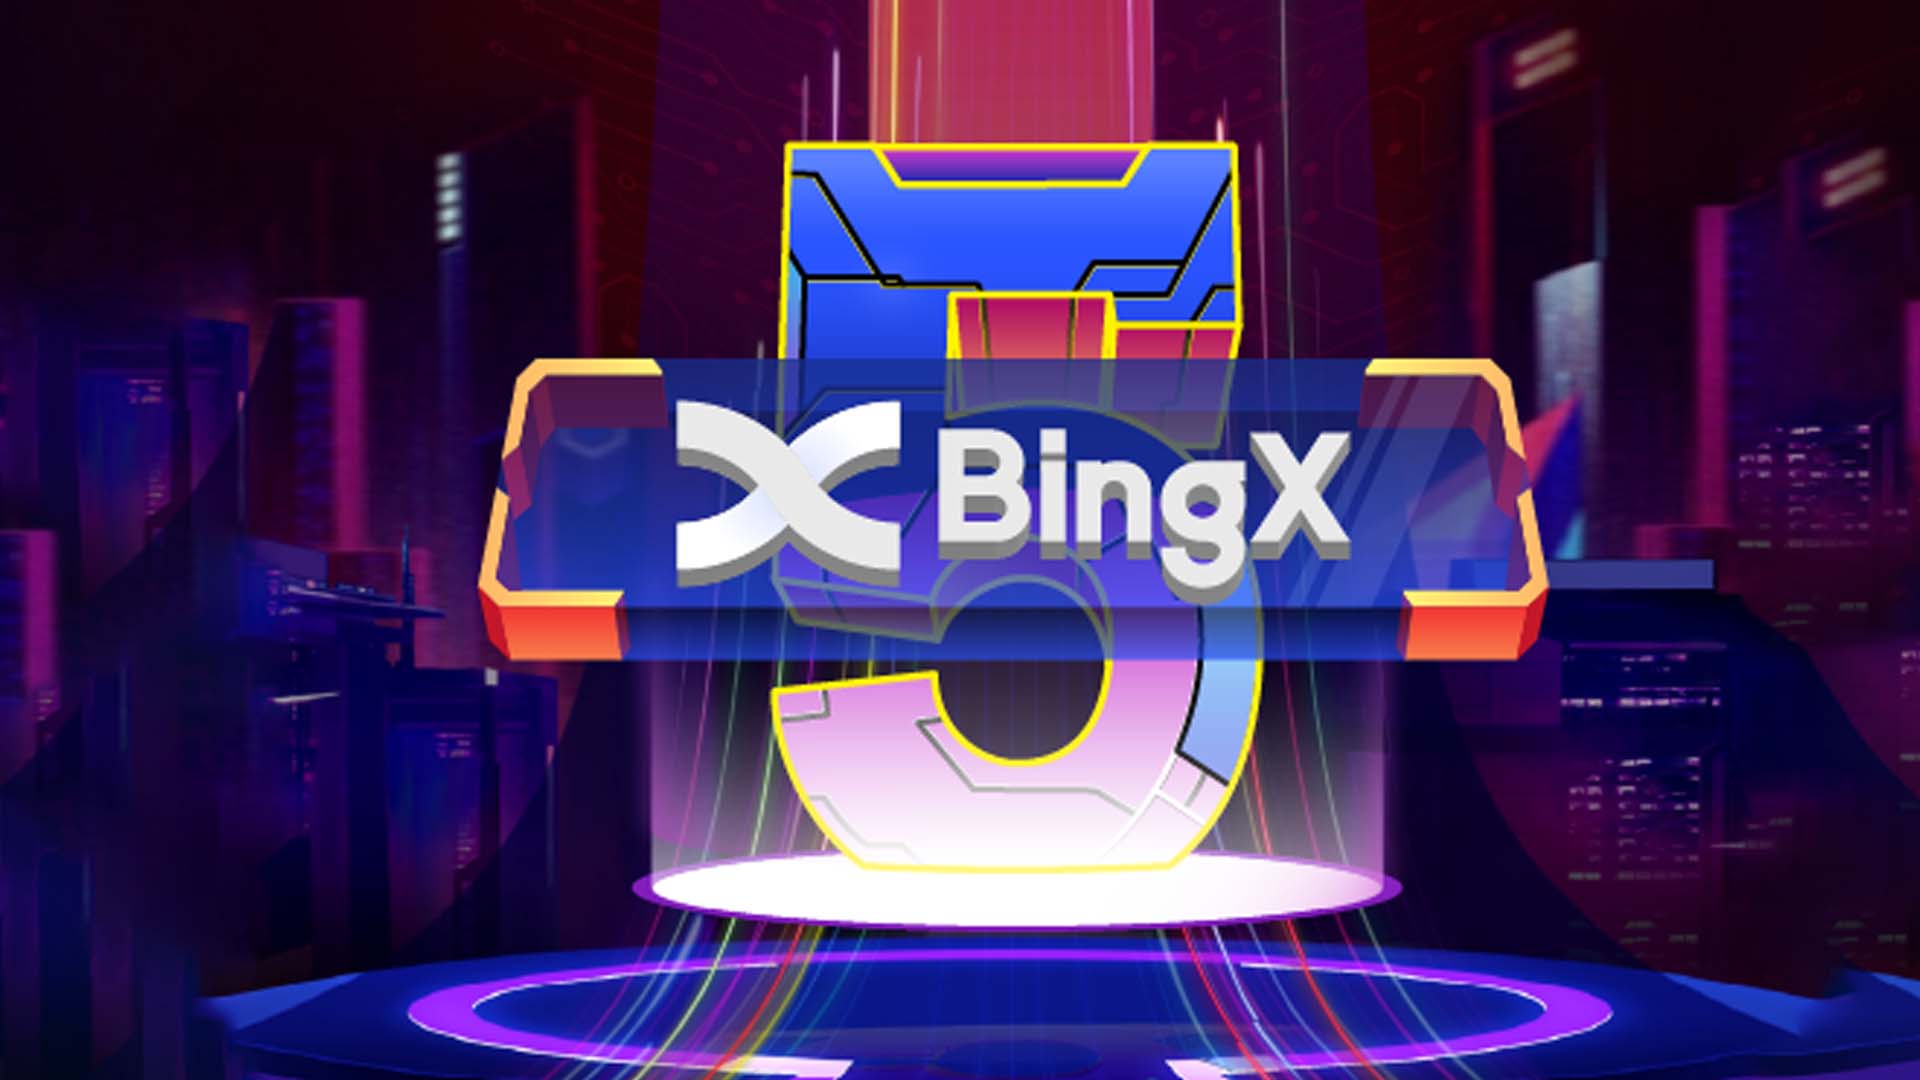 1 million USDT in prizes, 100 BTC and limited edition NFT rewards on the 5 years of BingX